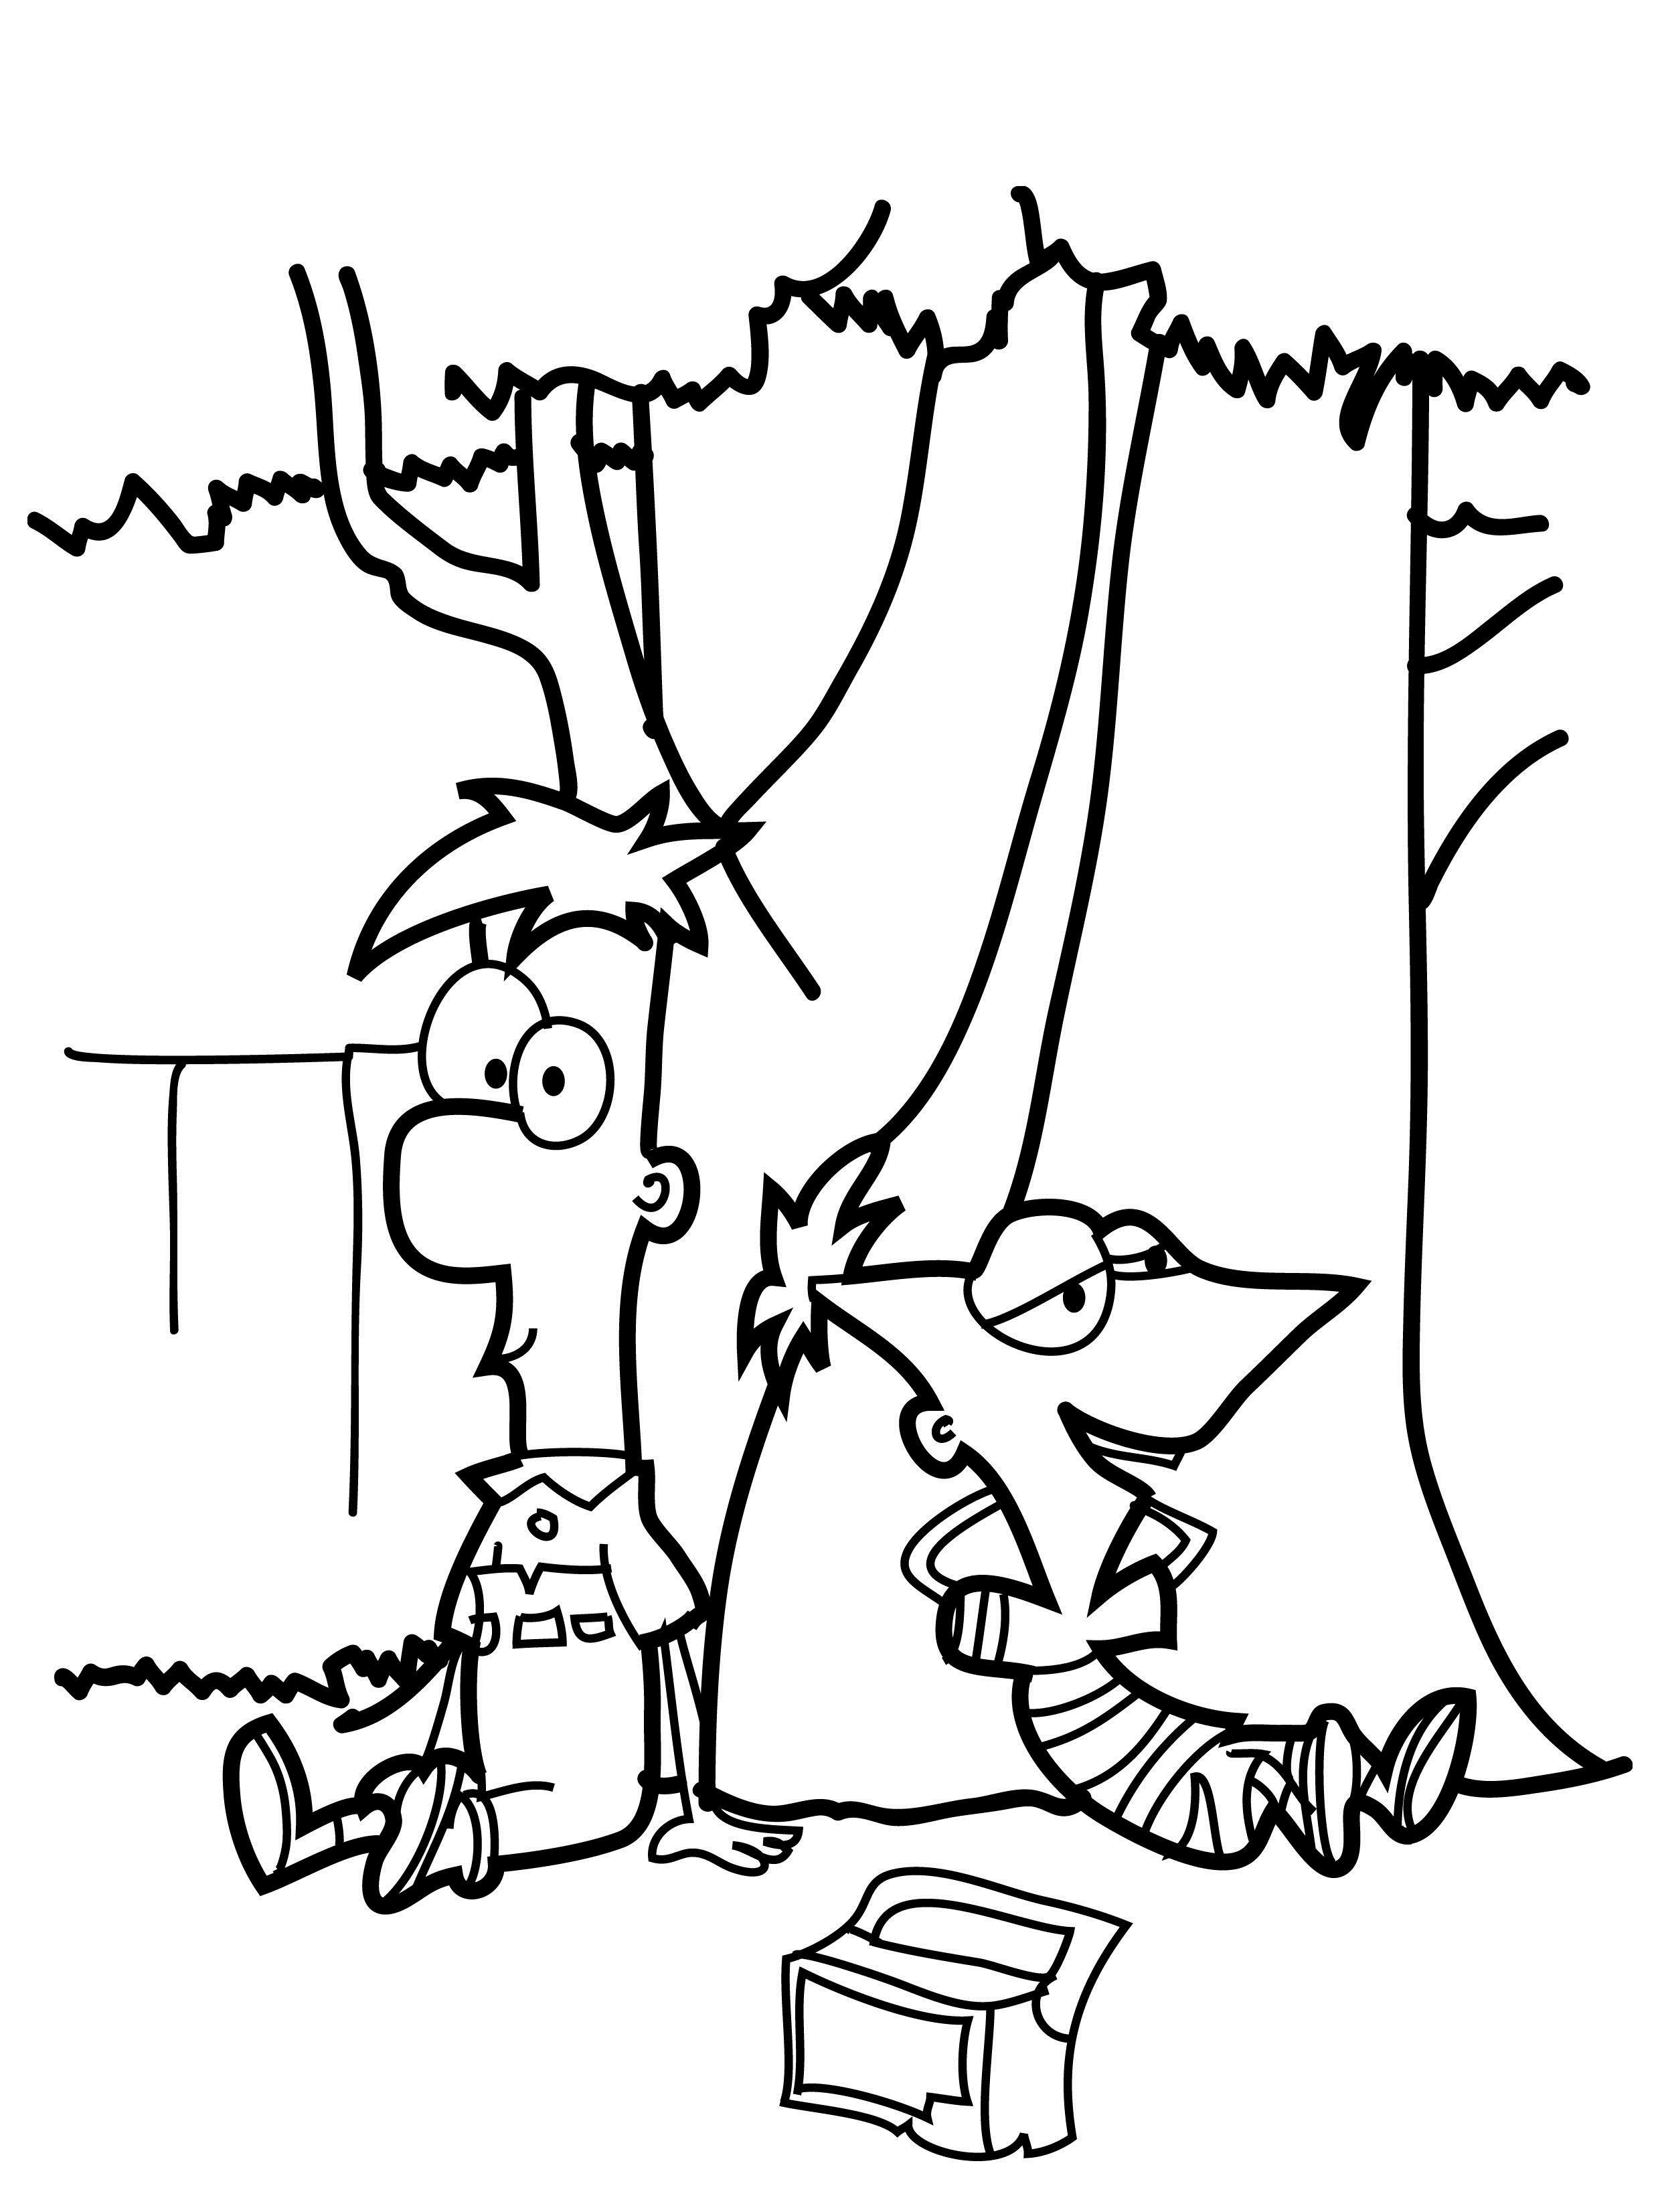 Phineas-and-Ferb-Coloring-Pages-Pictures